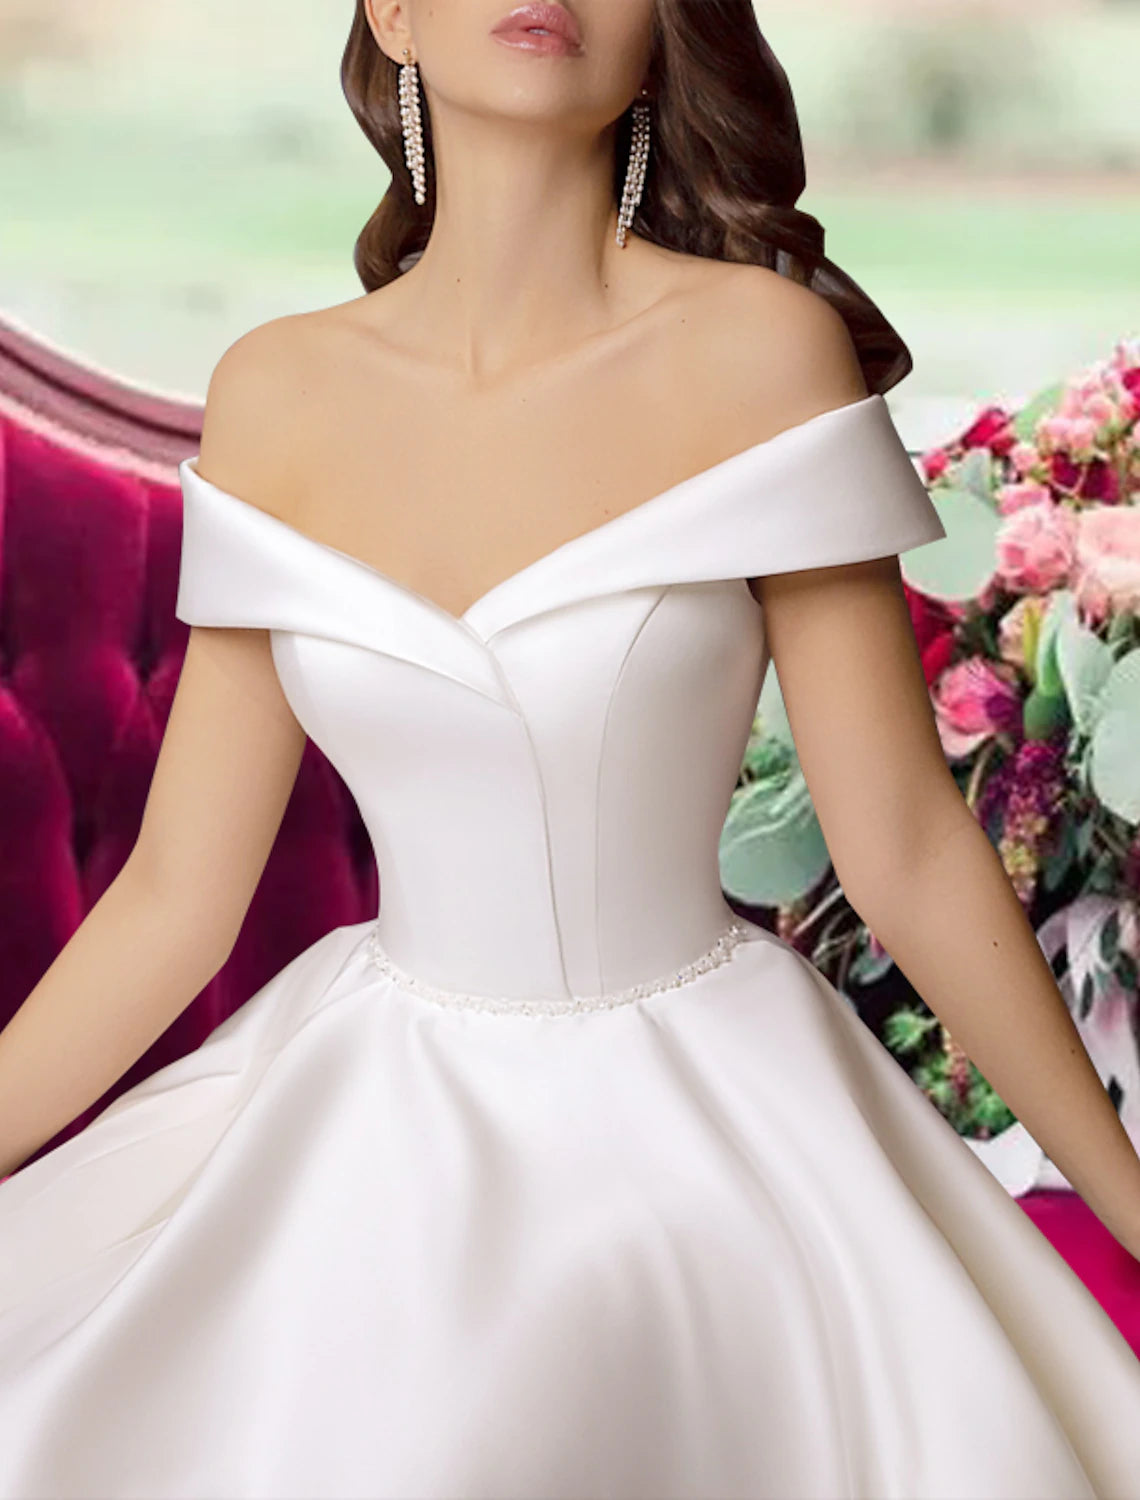 Reception Little White Dresses Wedding Dresses A-Line Off Shoulder Cap Sleeve Tea Length Satin Bridal Gowns With Sashes / Ribbons